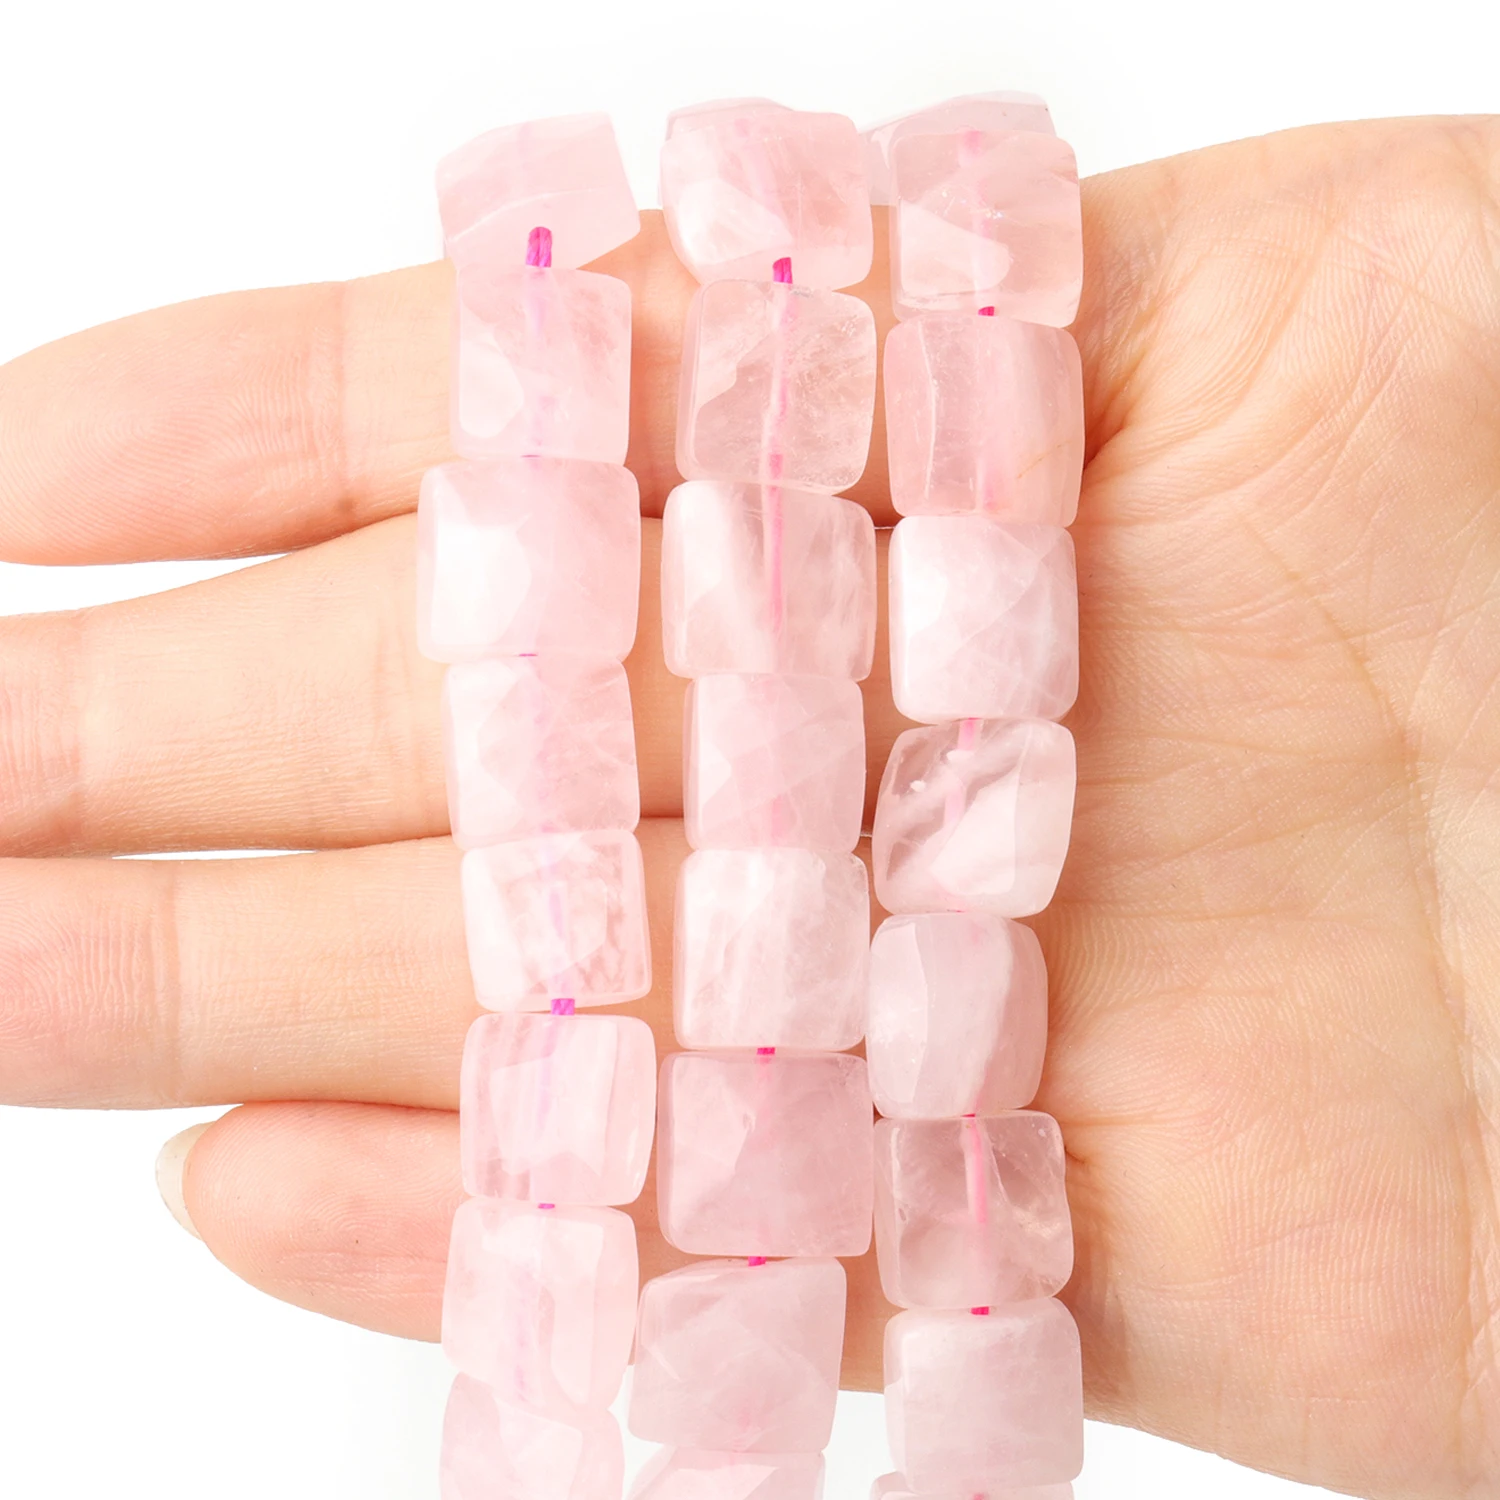 

10x5mm AAA Faceted Square Natural Stone Bead Madagascar Rose Quartz Loose Beads for Jewelry Making DIY Charms Bracelet Accessory